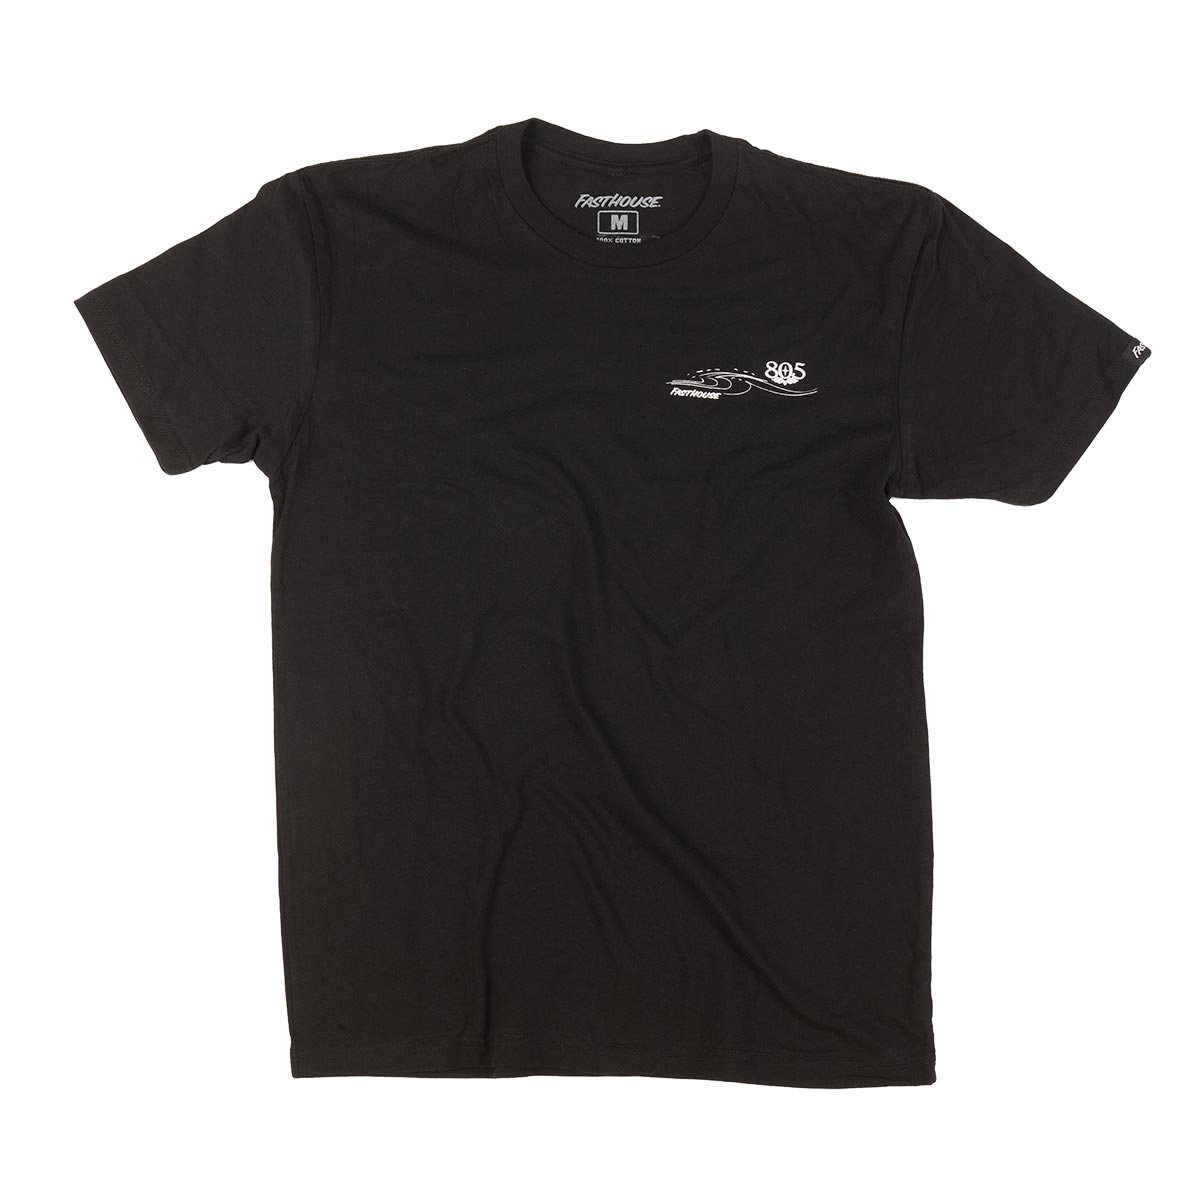 Fasthouse - 805 Live Tee - Black